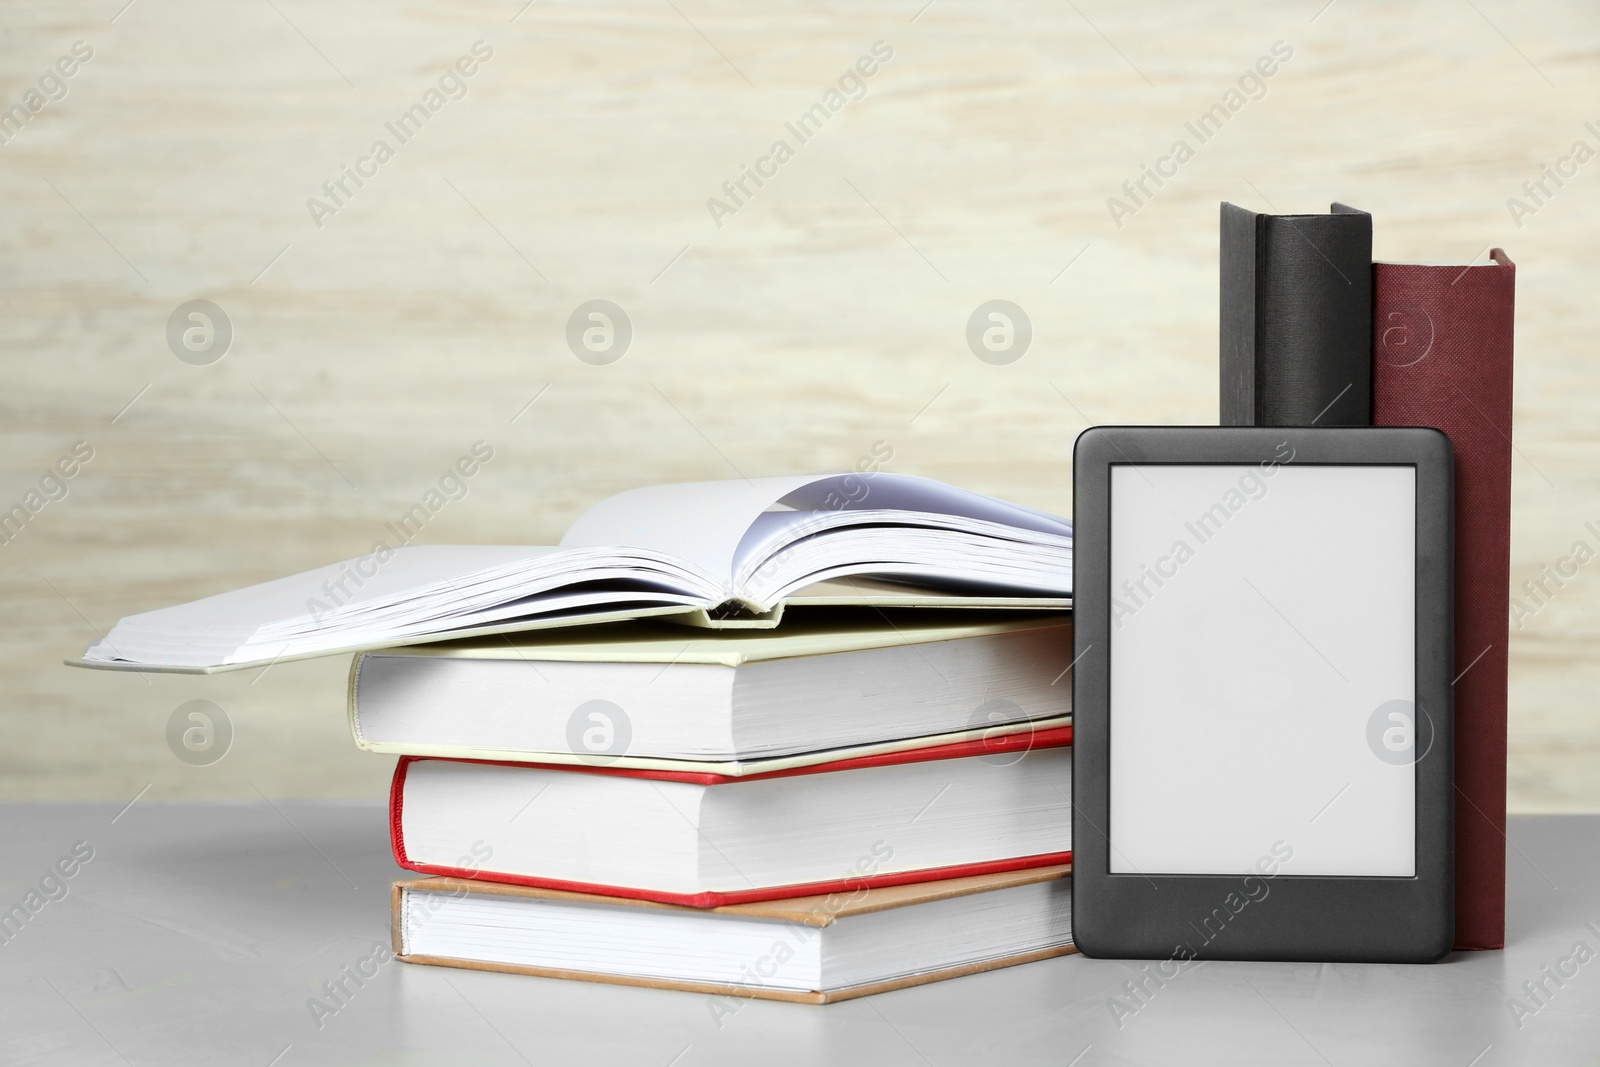 Photo of Portable e-book reader and many hardcover books on white textured table